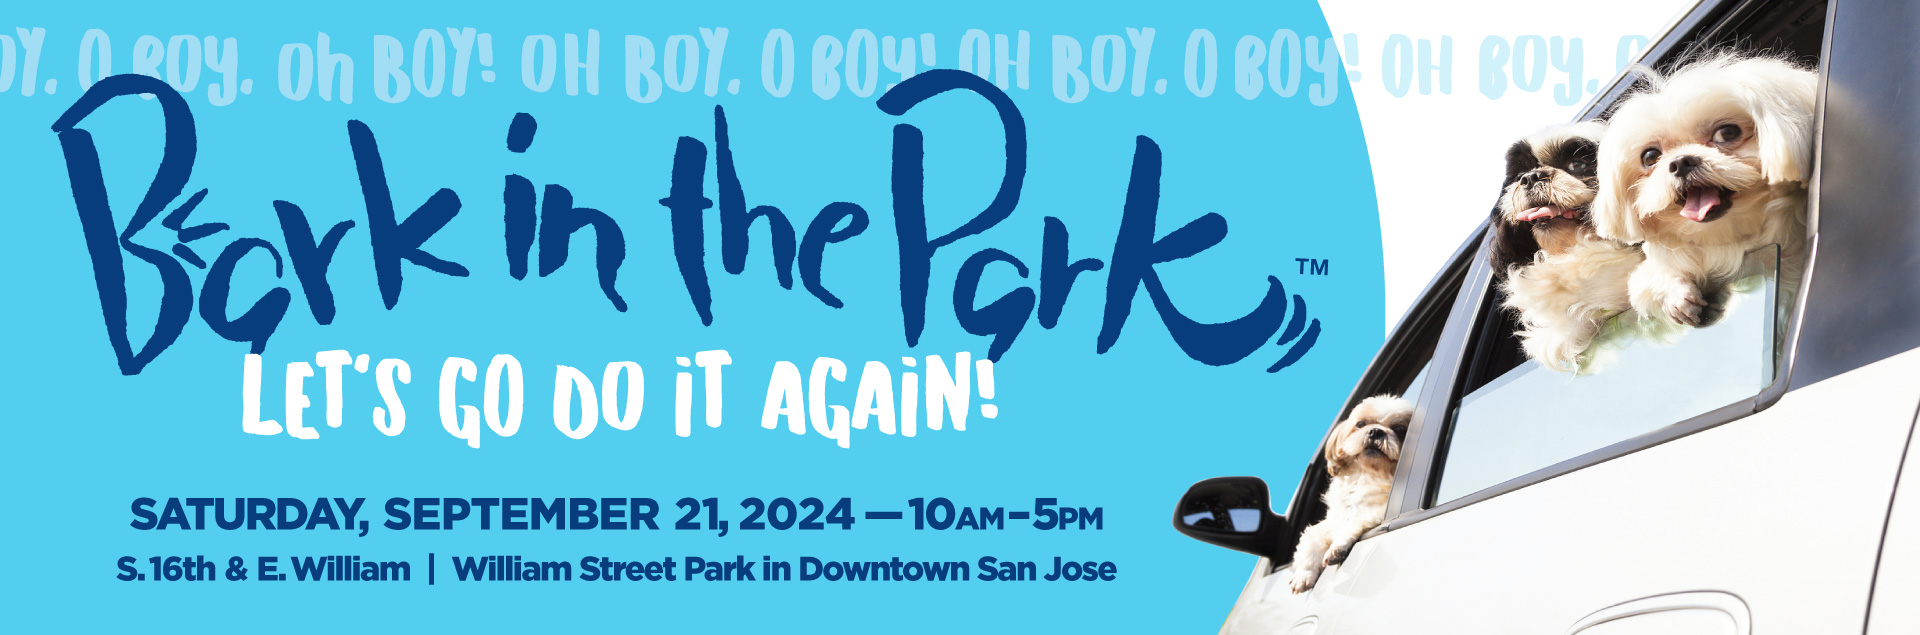 Bark in the Park San Jose Largest Dog Festival in the US